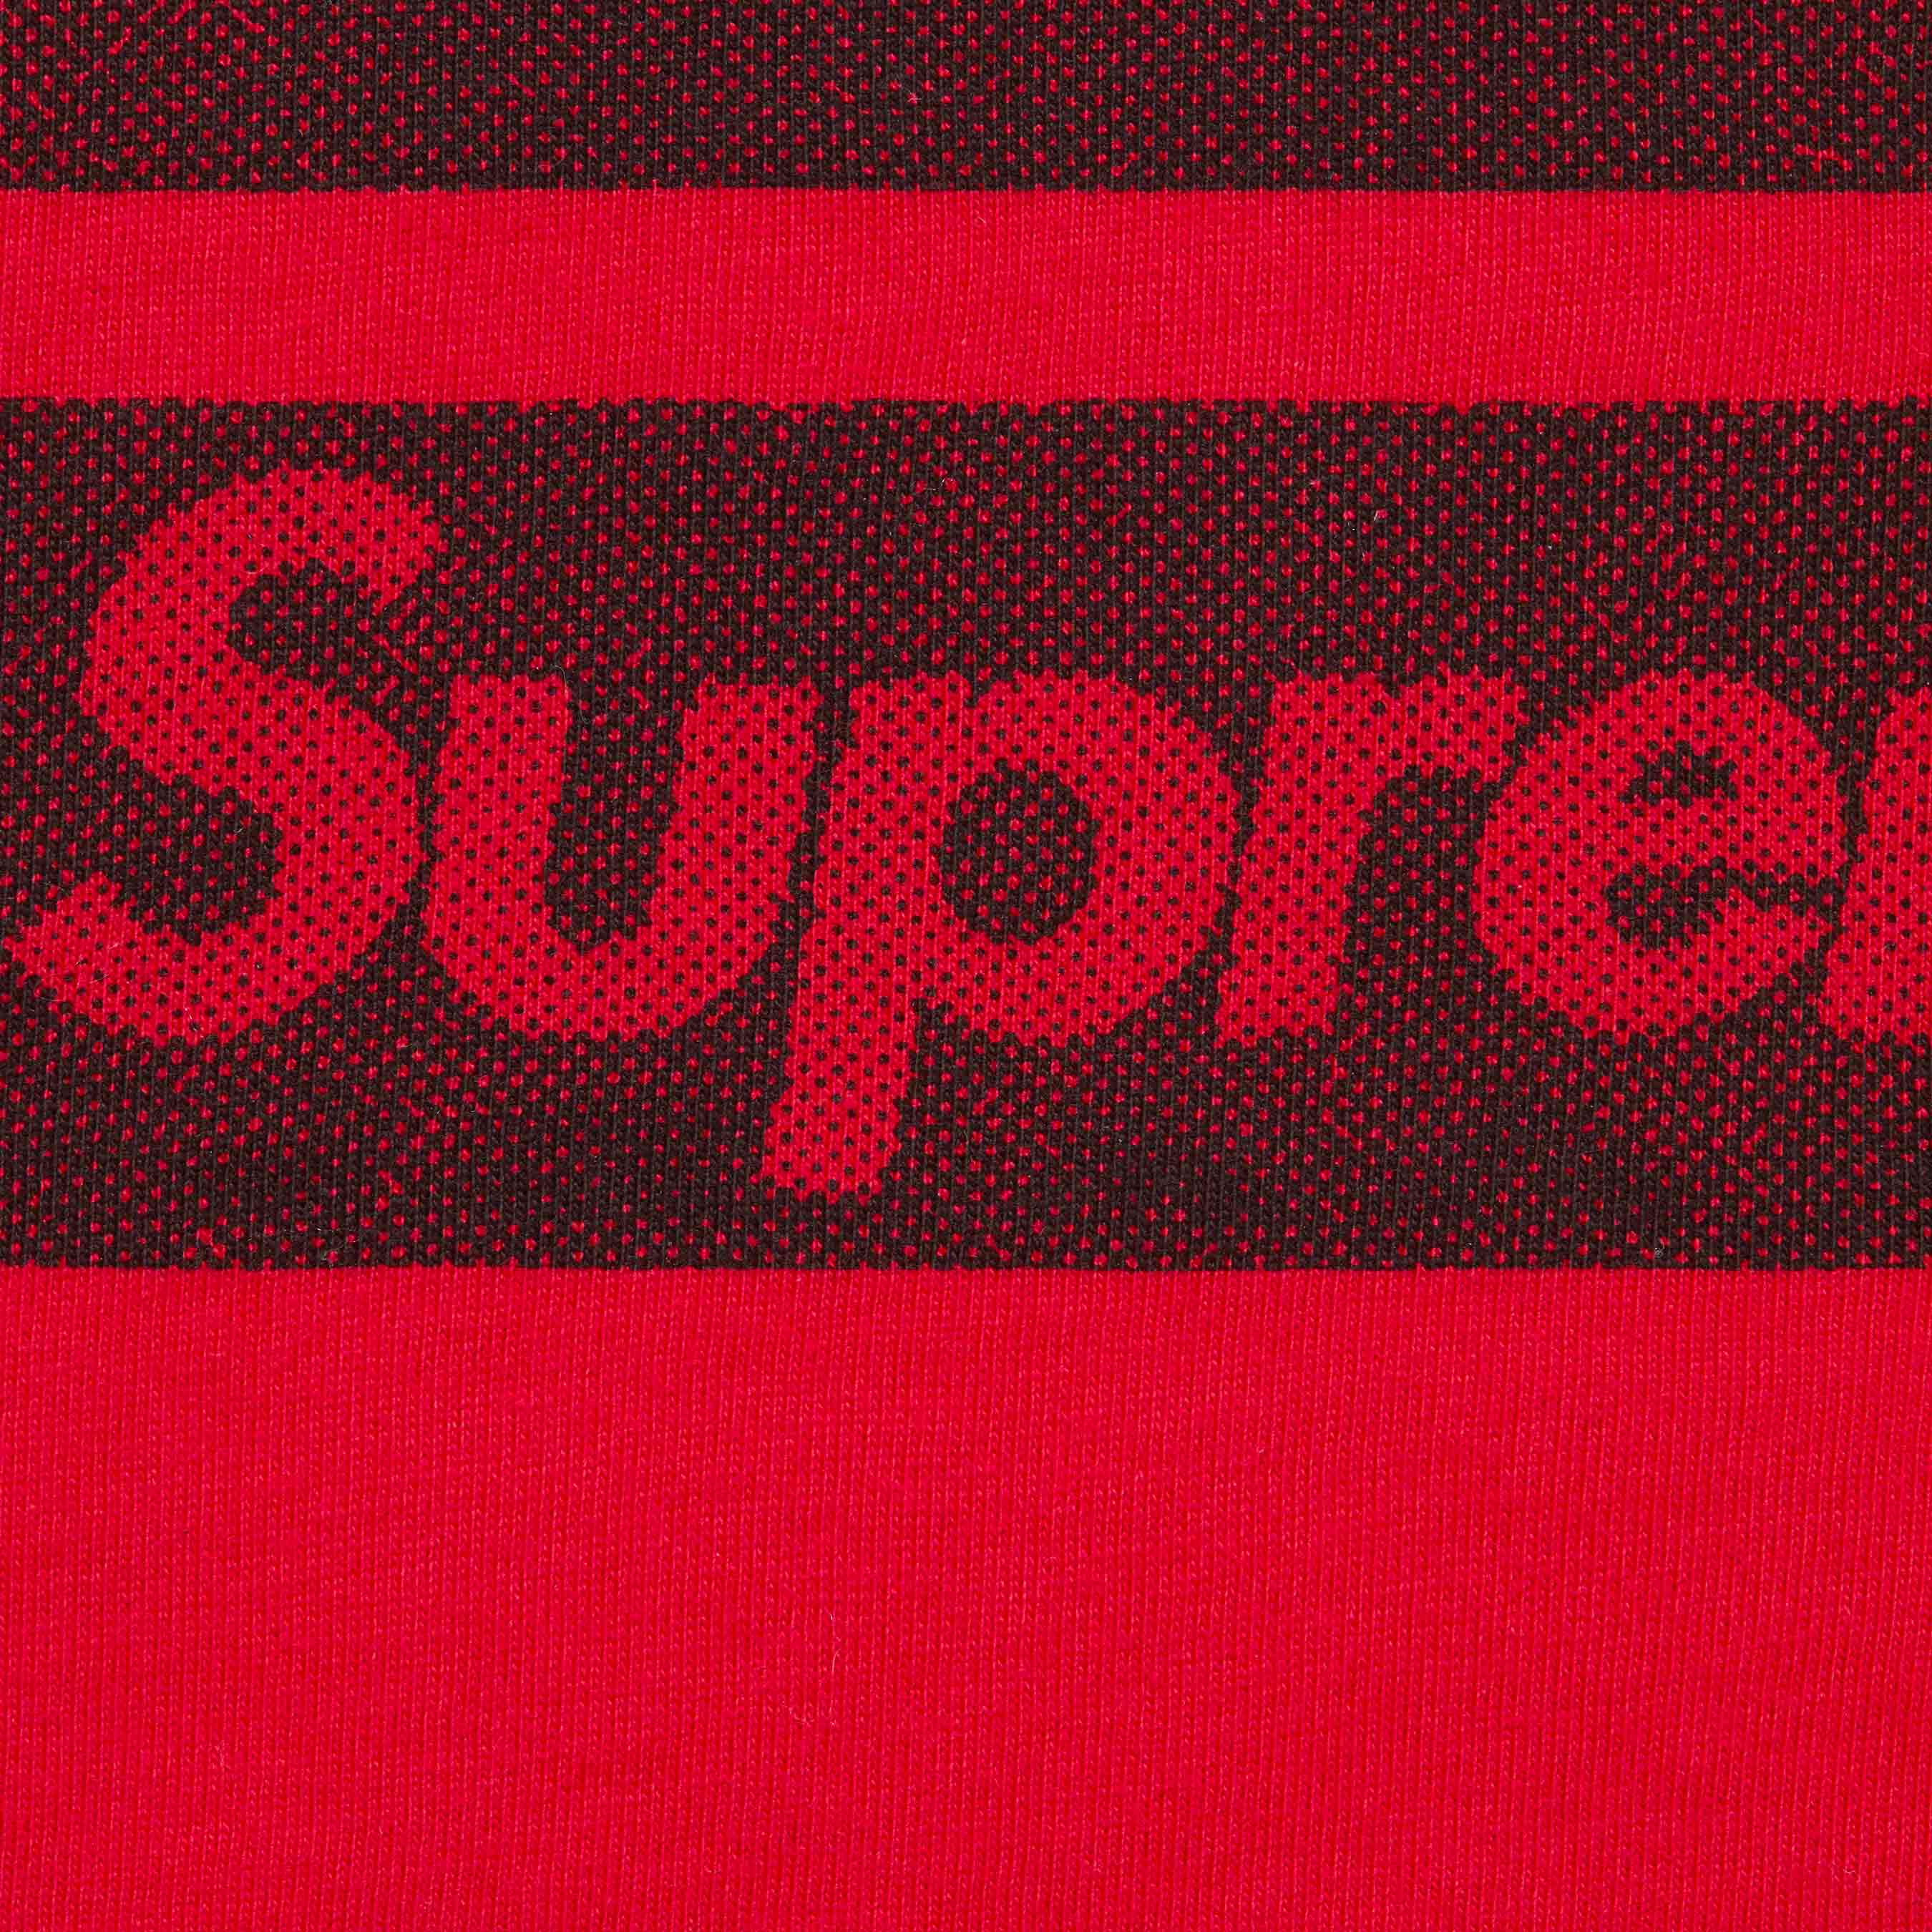 The North Face S S Top - spring summer 2024 - Supreme